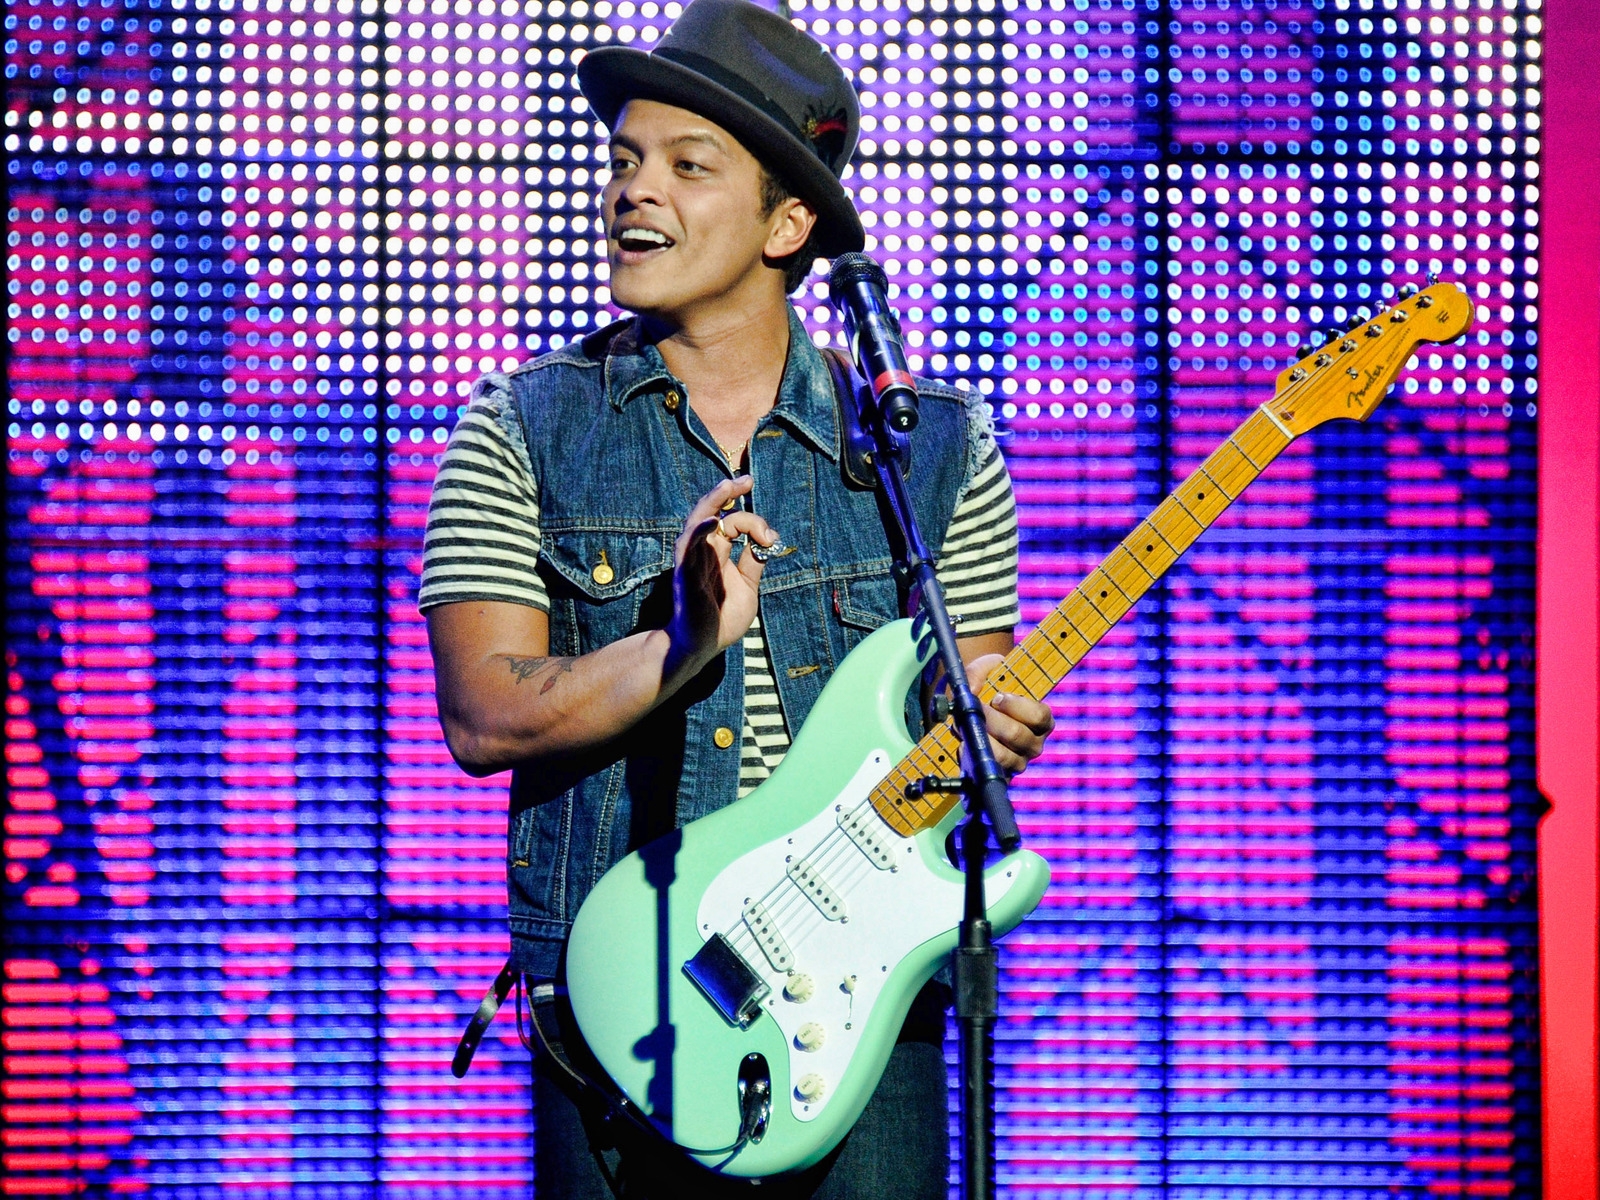 Bruno Mars in Concert for 1600 x 1200 resolution